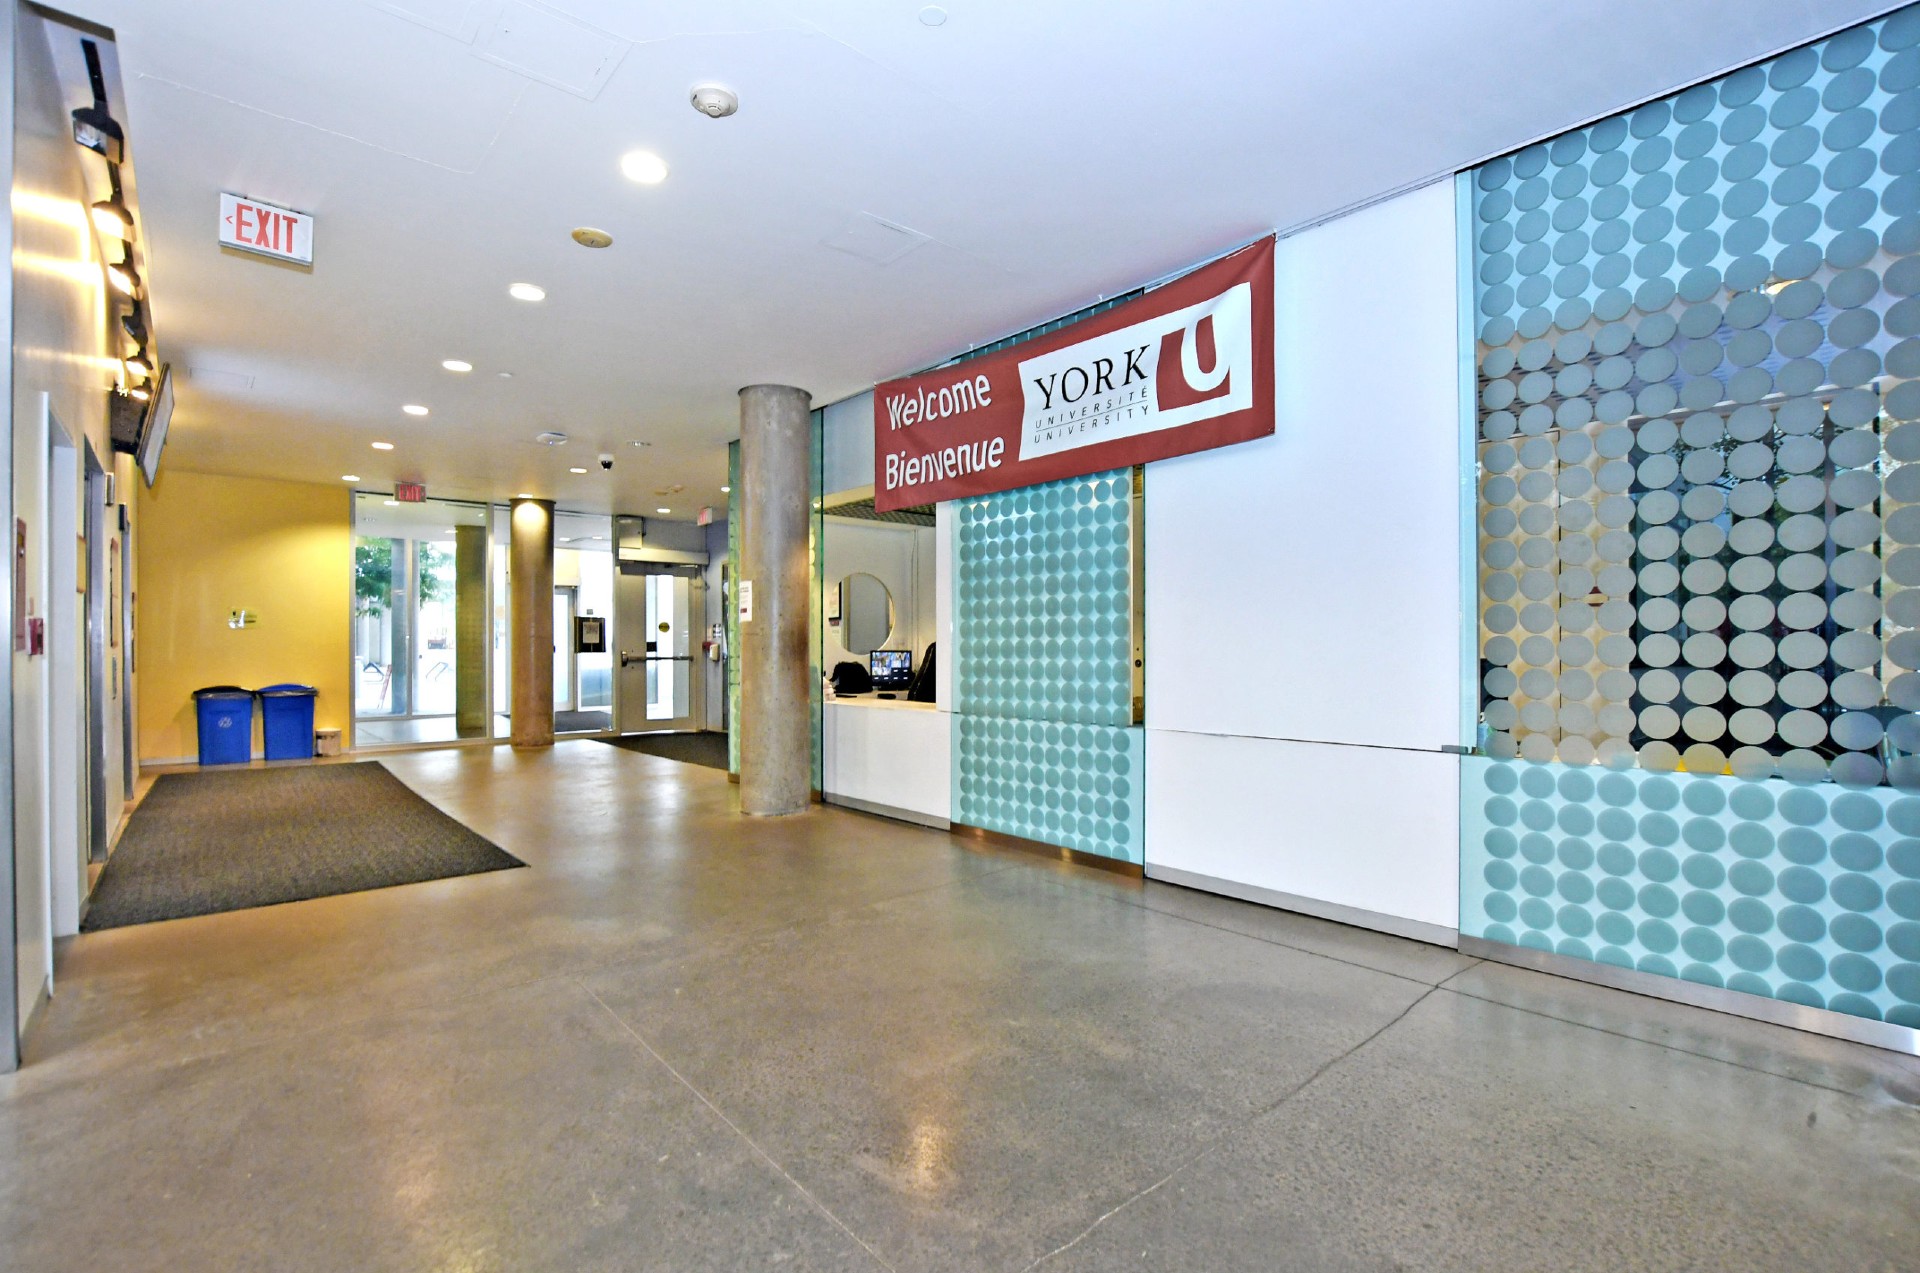 Picture of the lobby of the Pond-Hall building